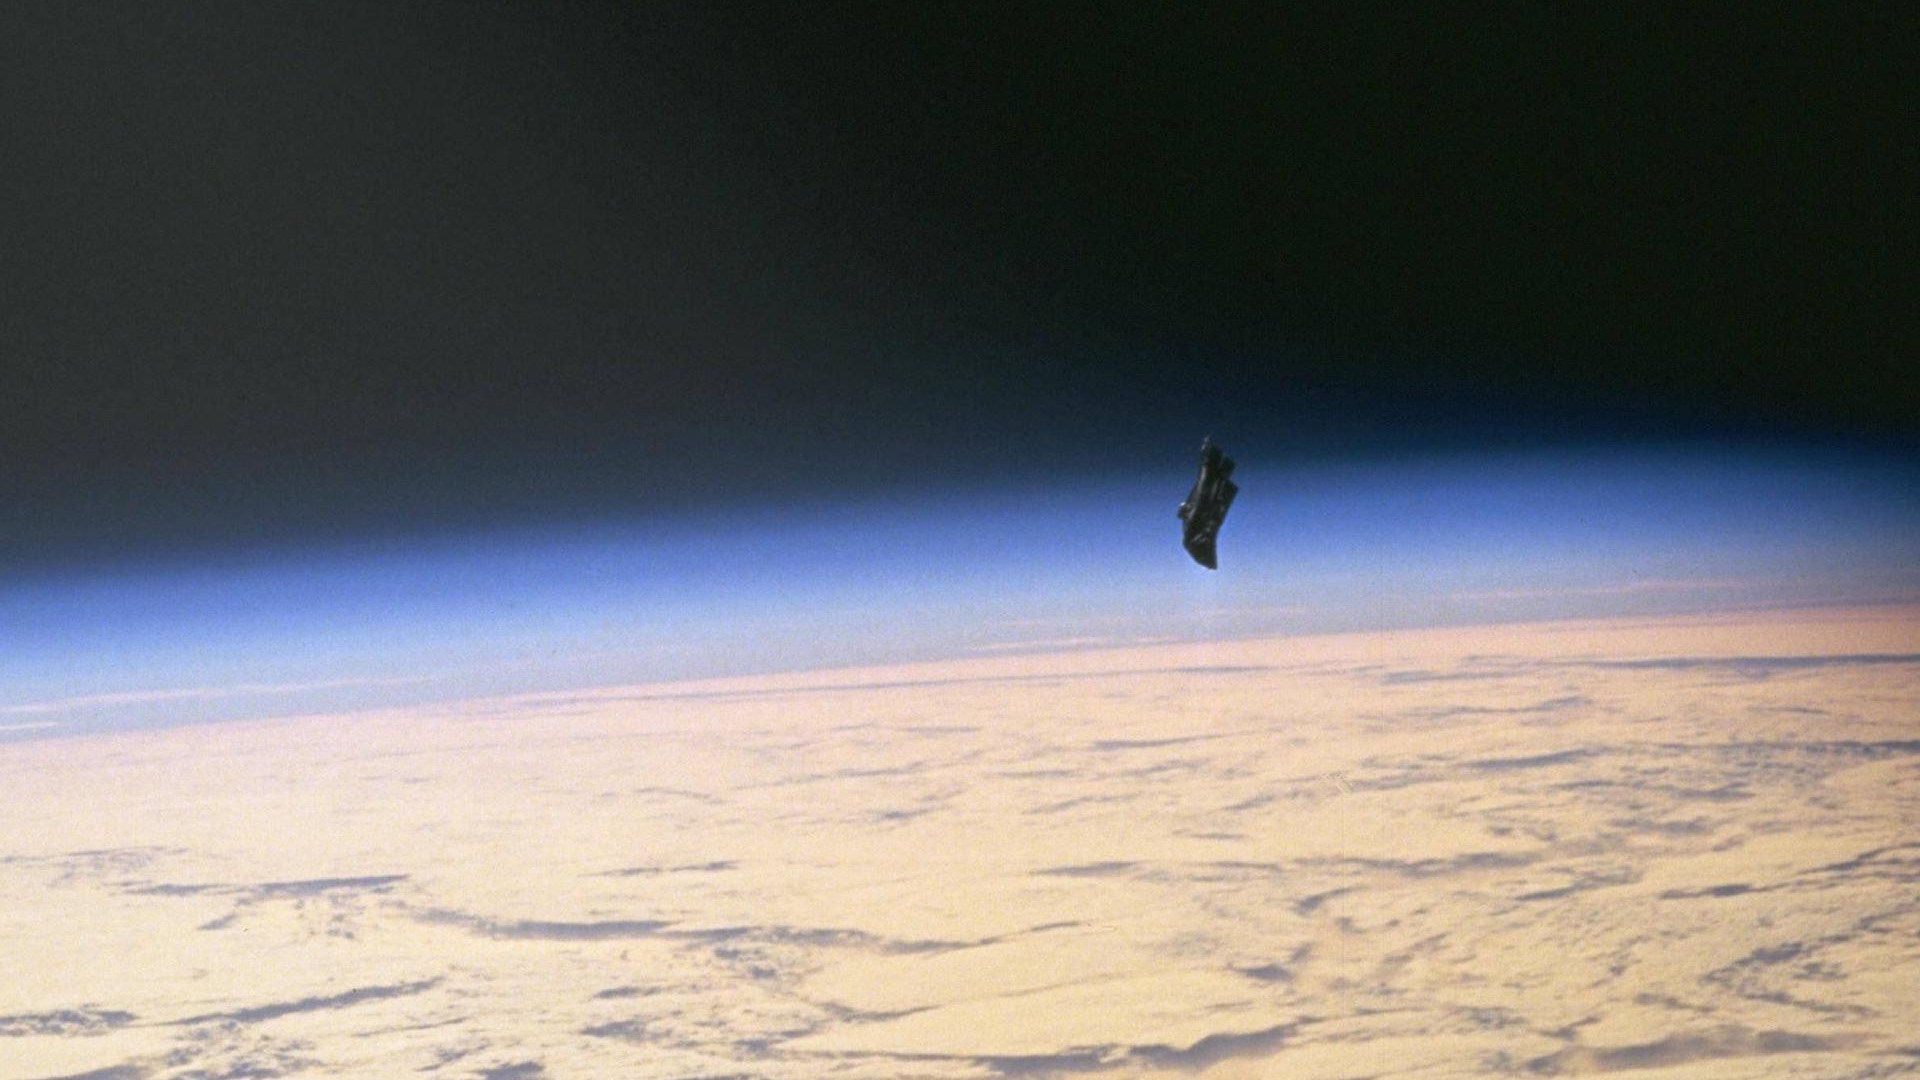 17 Creepy Facts About The Black Knight Satellite Conspiracy Theory 